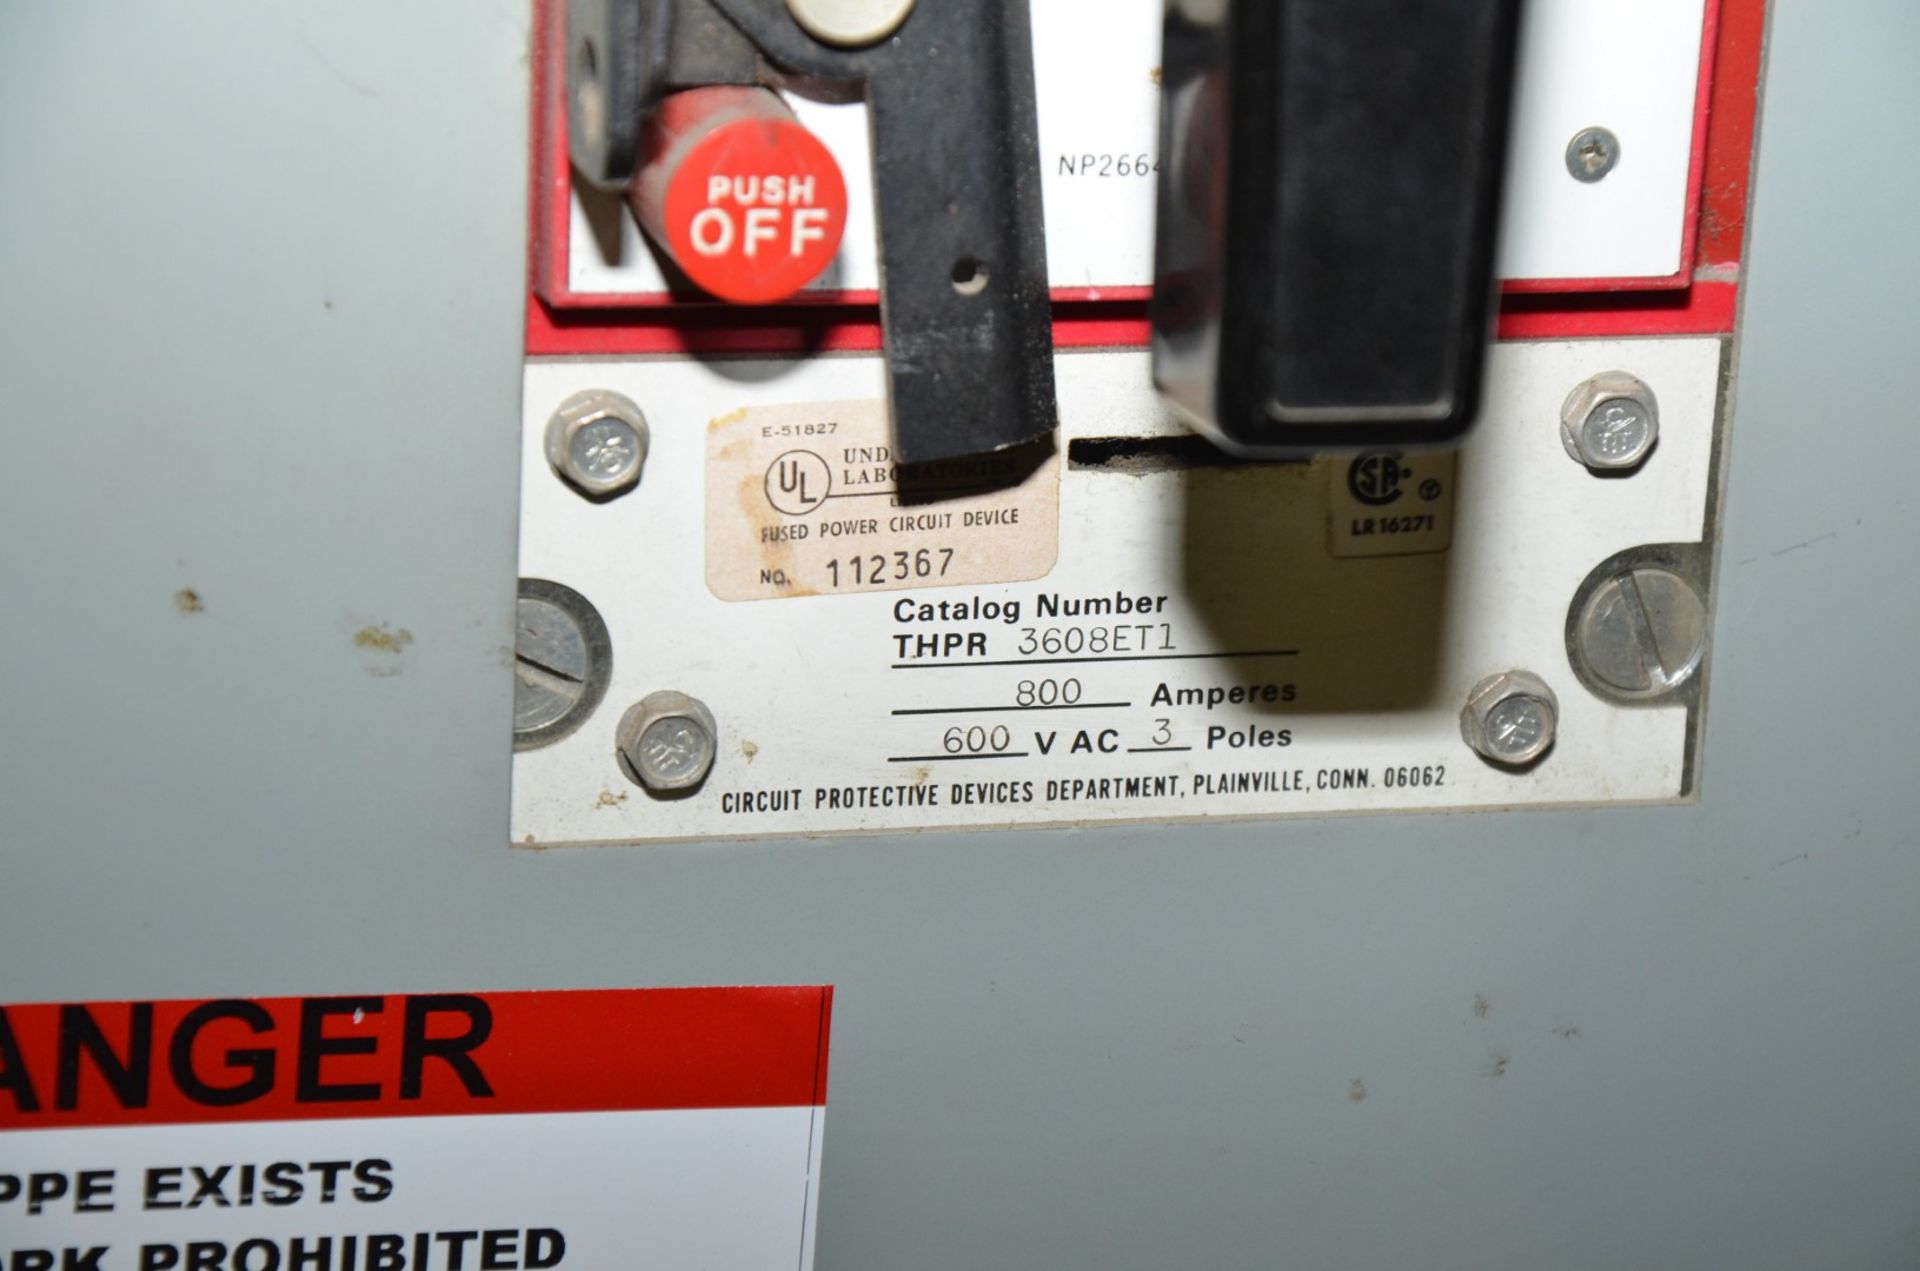 GENERAL ELECTRIC LOAD BREAK SWITCH (CI) [RIGGING FEE FOR LOT #116 - $300 USD PLUS APPLICABLE TAXES]